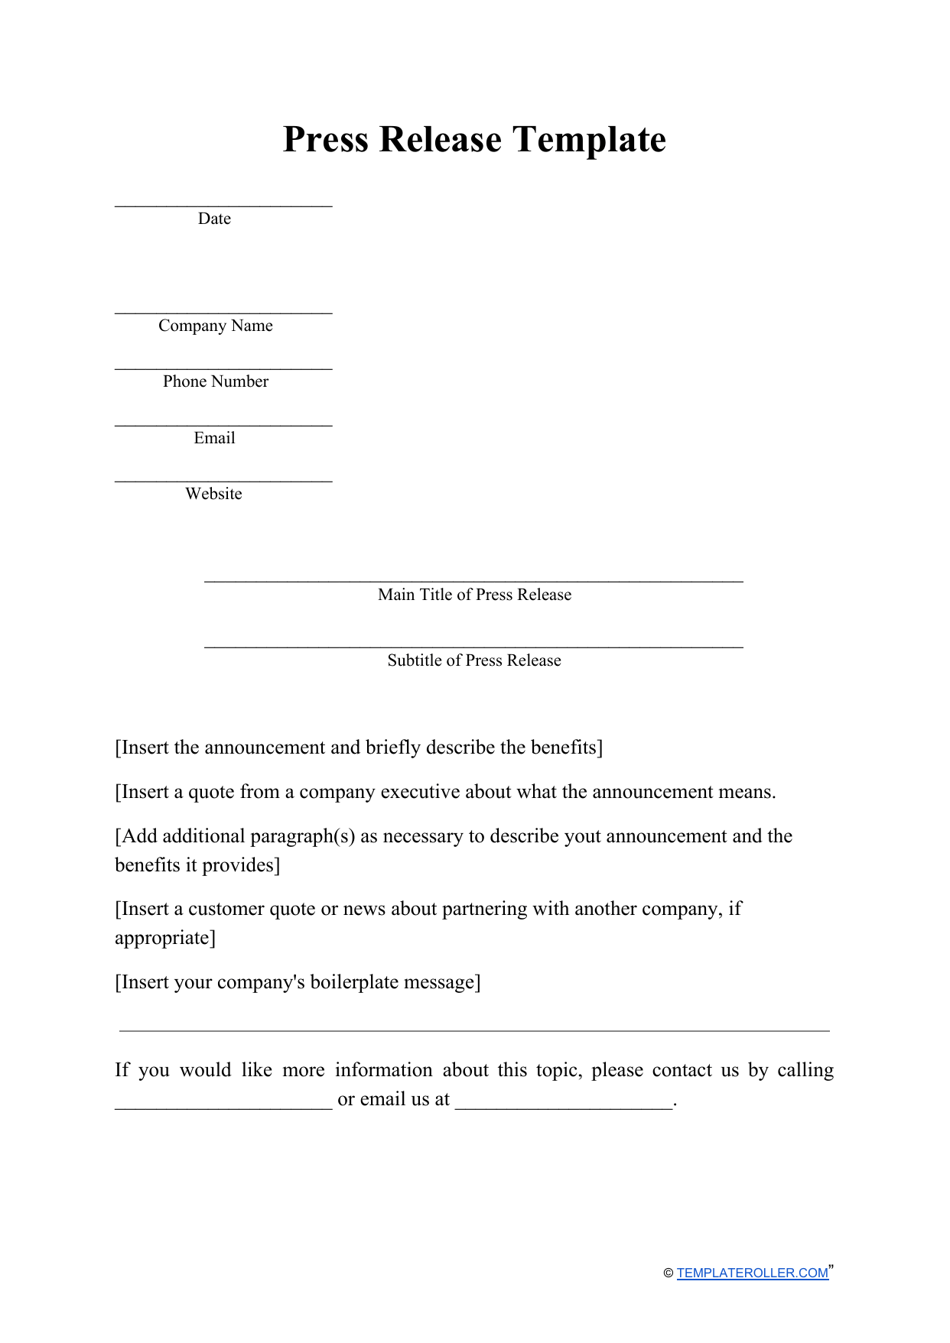 Press Release Template, Page 1